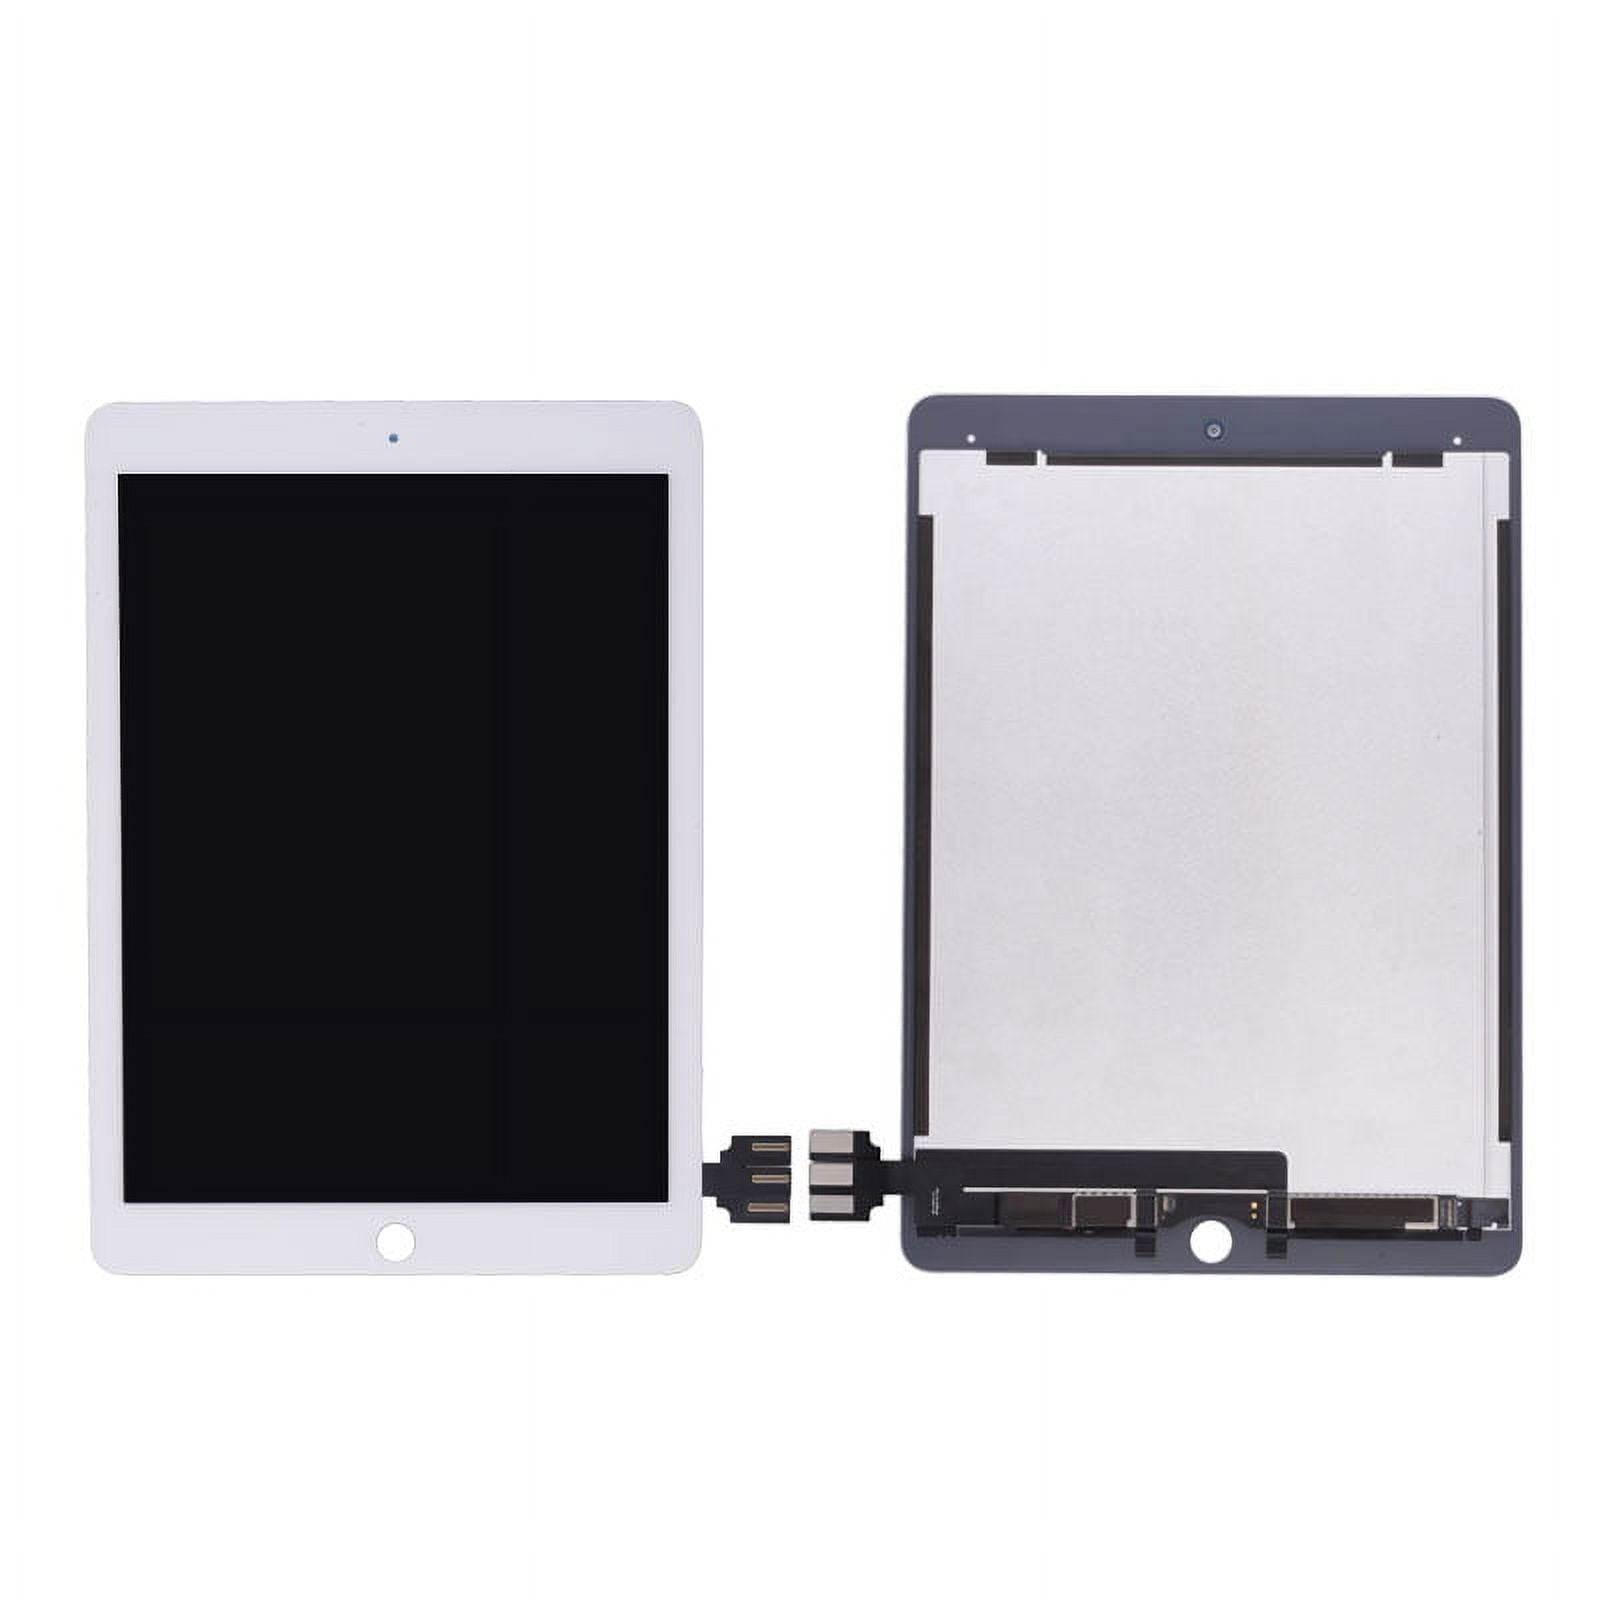 GSA LCD Digitizer Touch Panel for iPad Pro 9.7 - White A1673